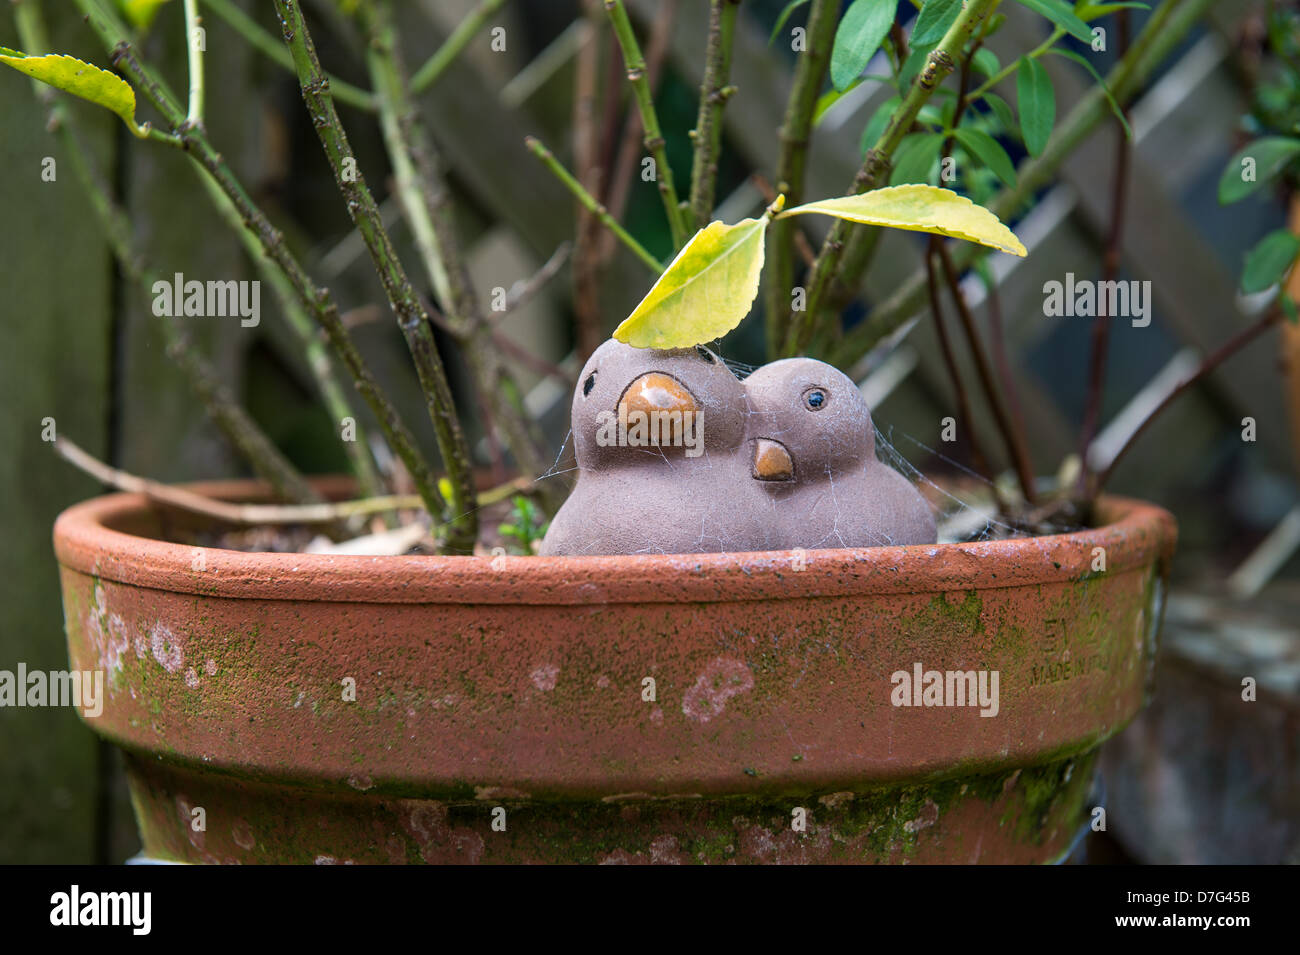 Terracotta Pot In A Garden With Small Bird Decorations Stock